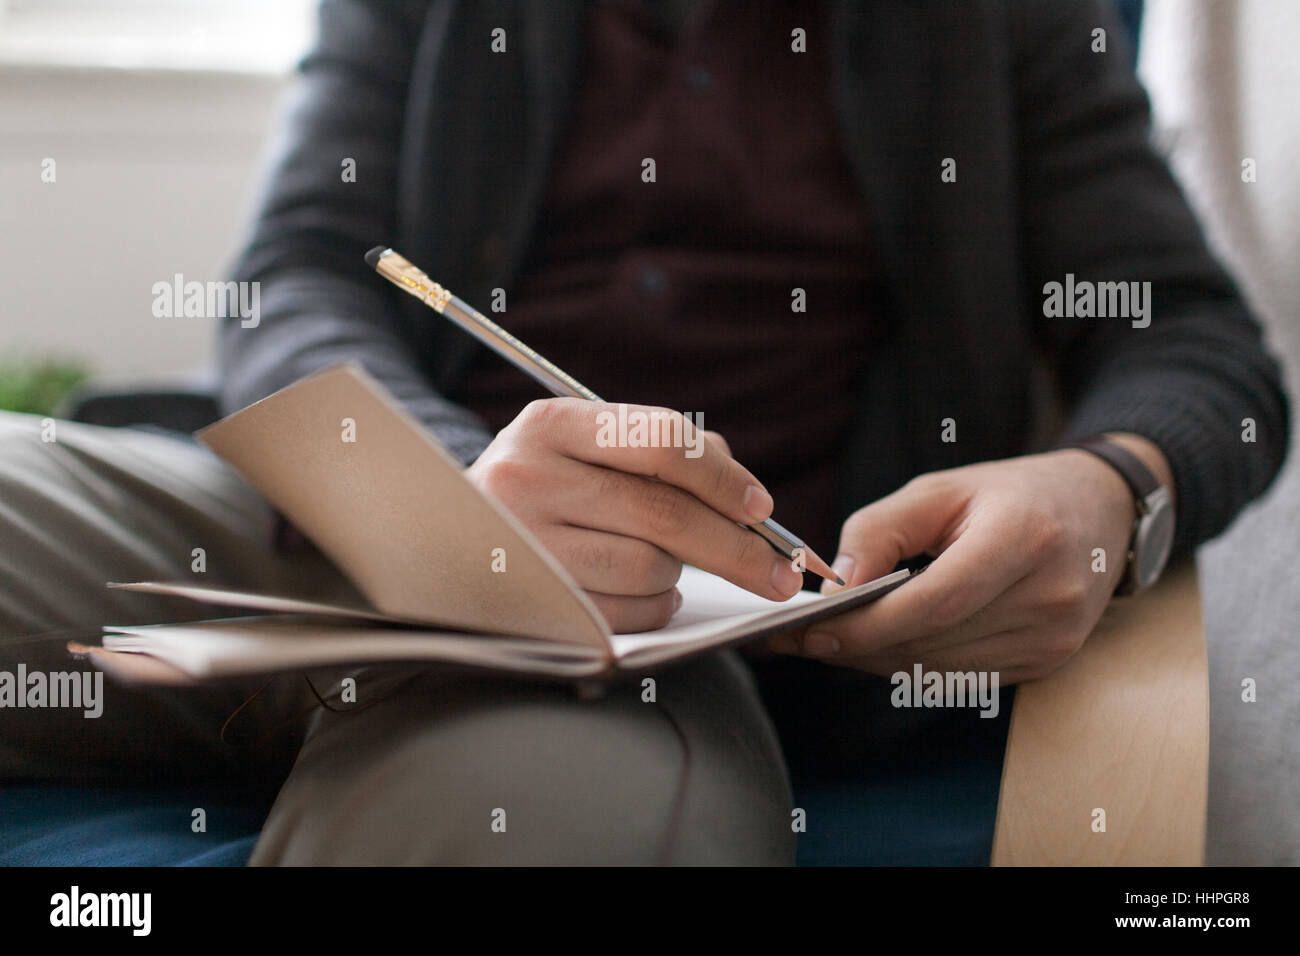 Young man sitting on a chair writing in his notebook with a pencil Stock Photo